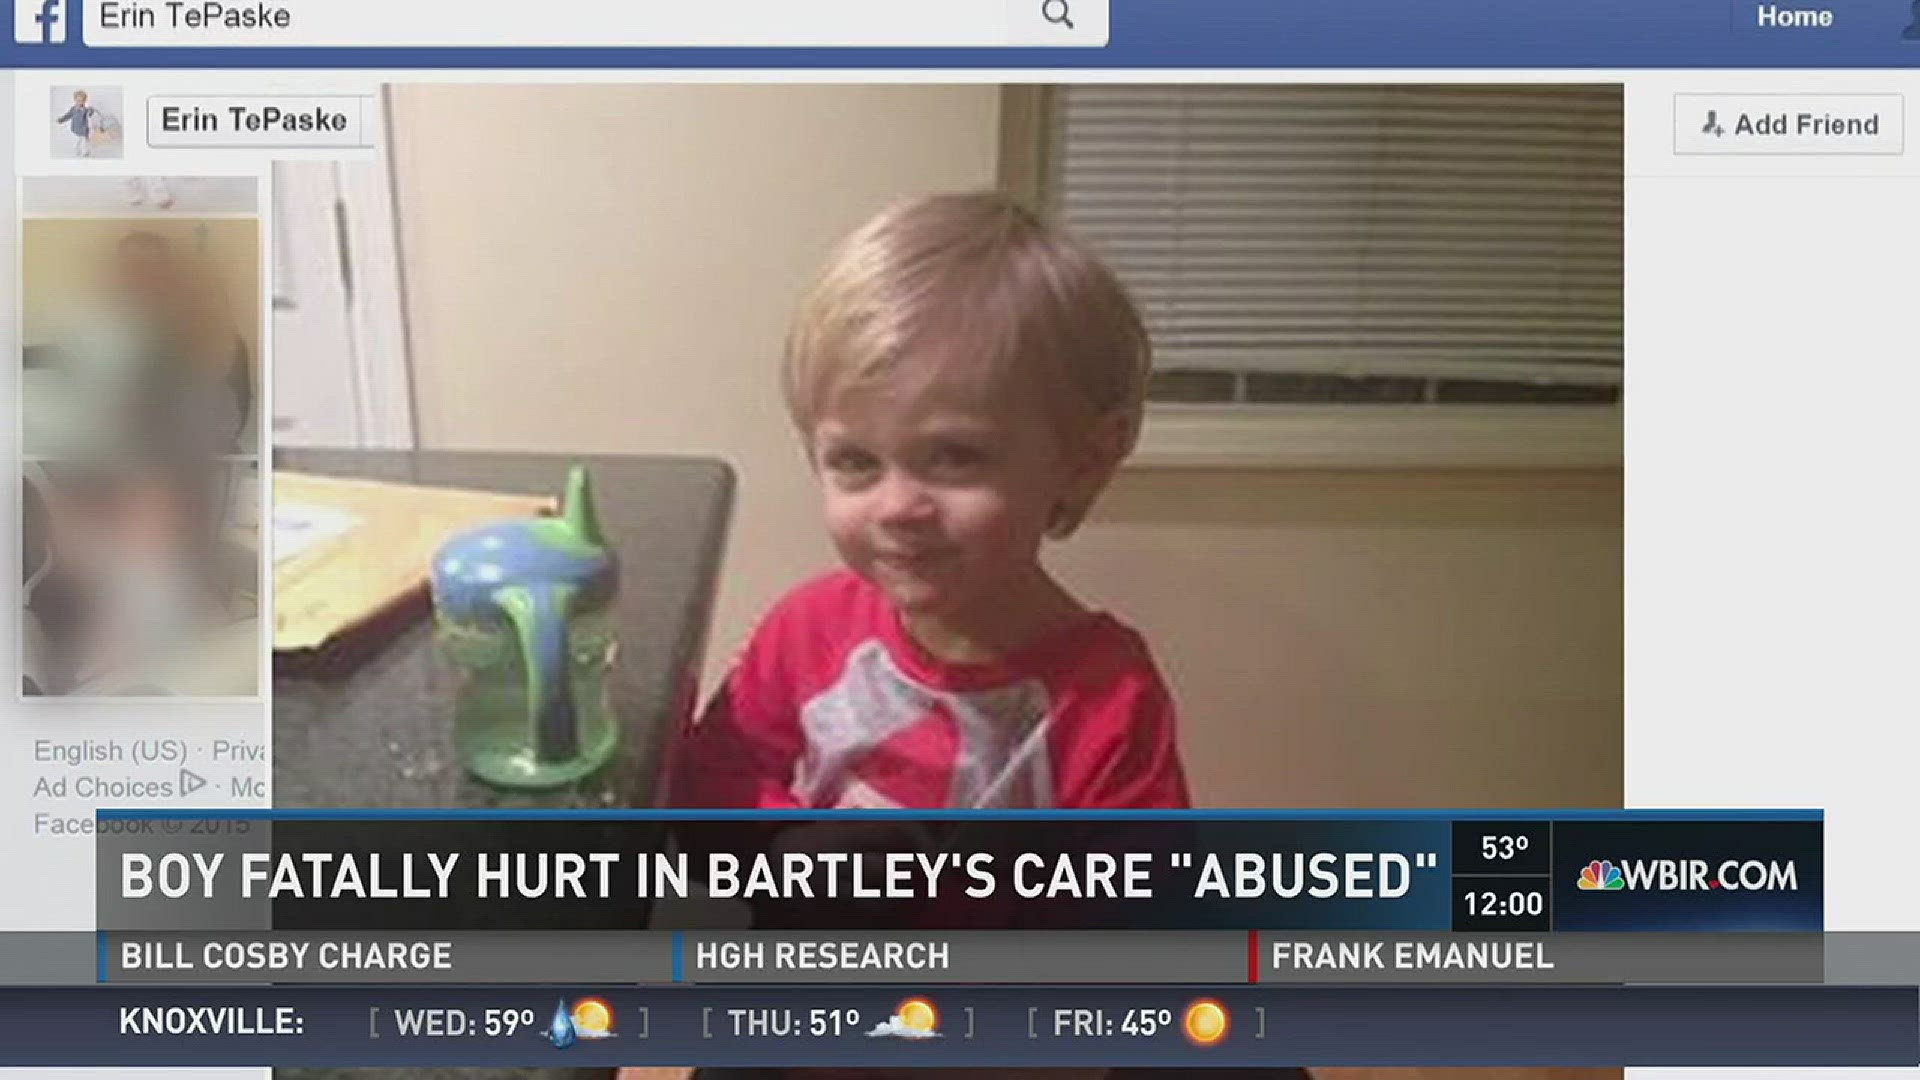 In May, a 3-year-old boy suffered a fatal head injury while in the care of convicted Campbell County school shooter Kenneth Bartley.